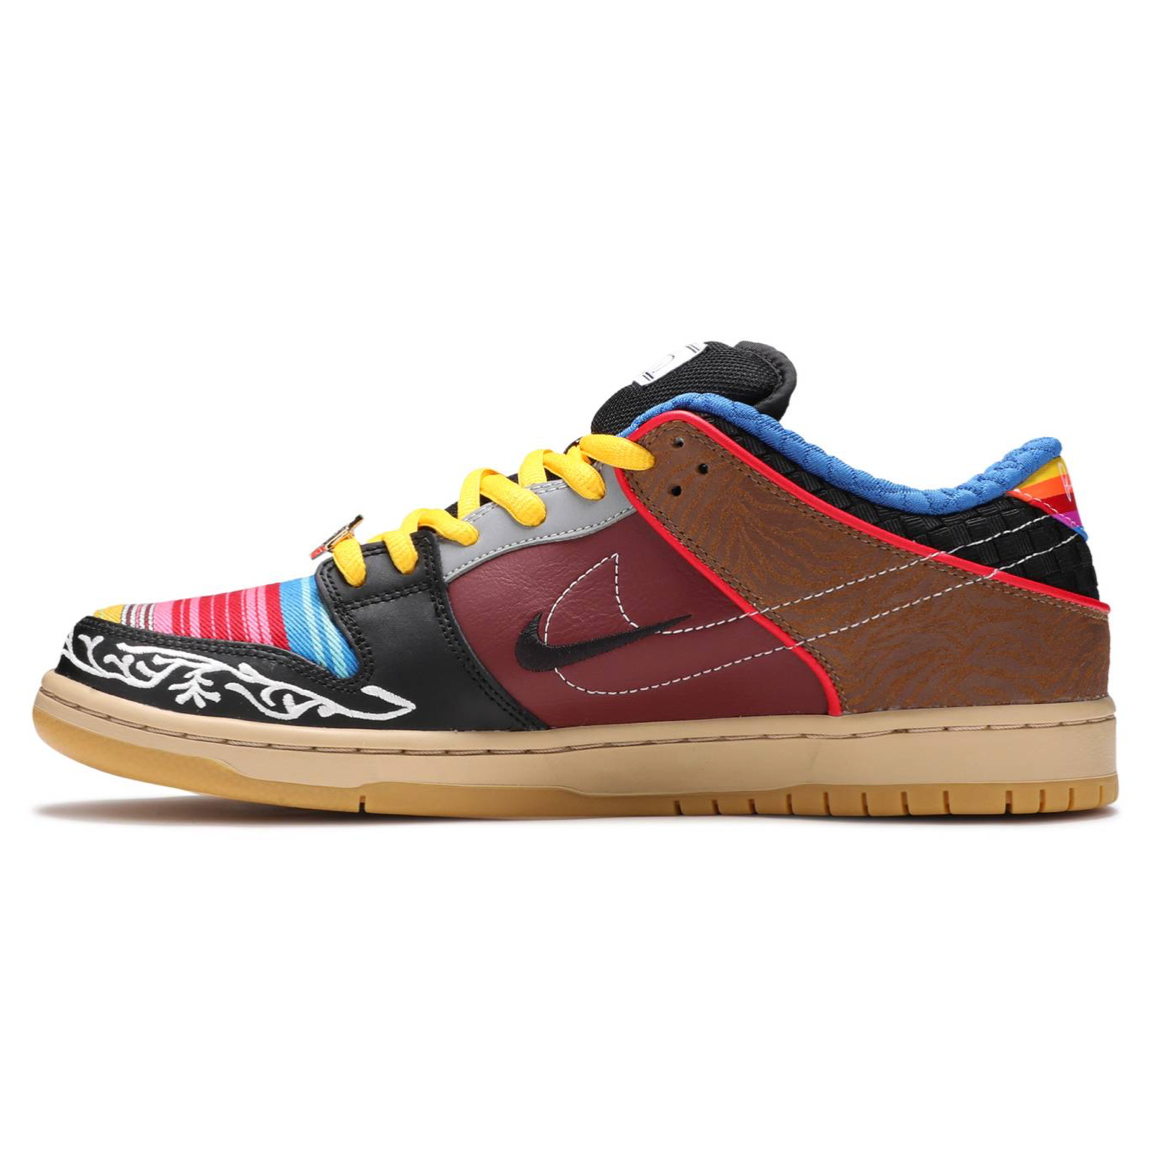 Nike SB Dunk Low What The Paul from Nike